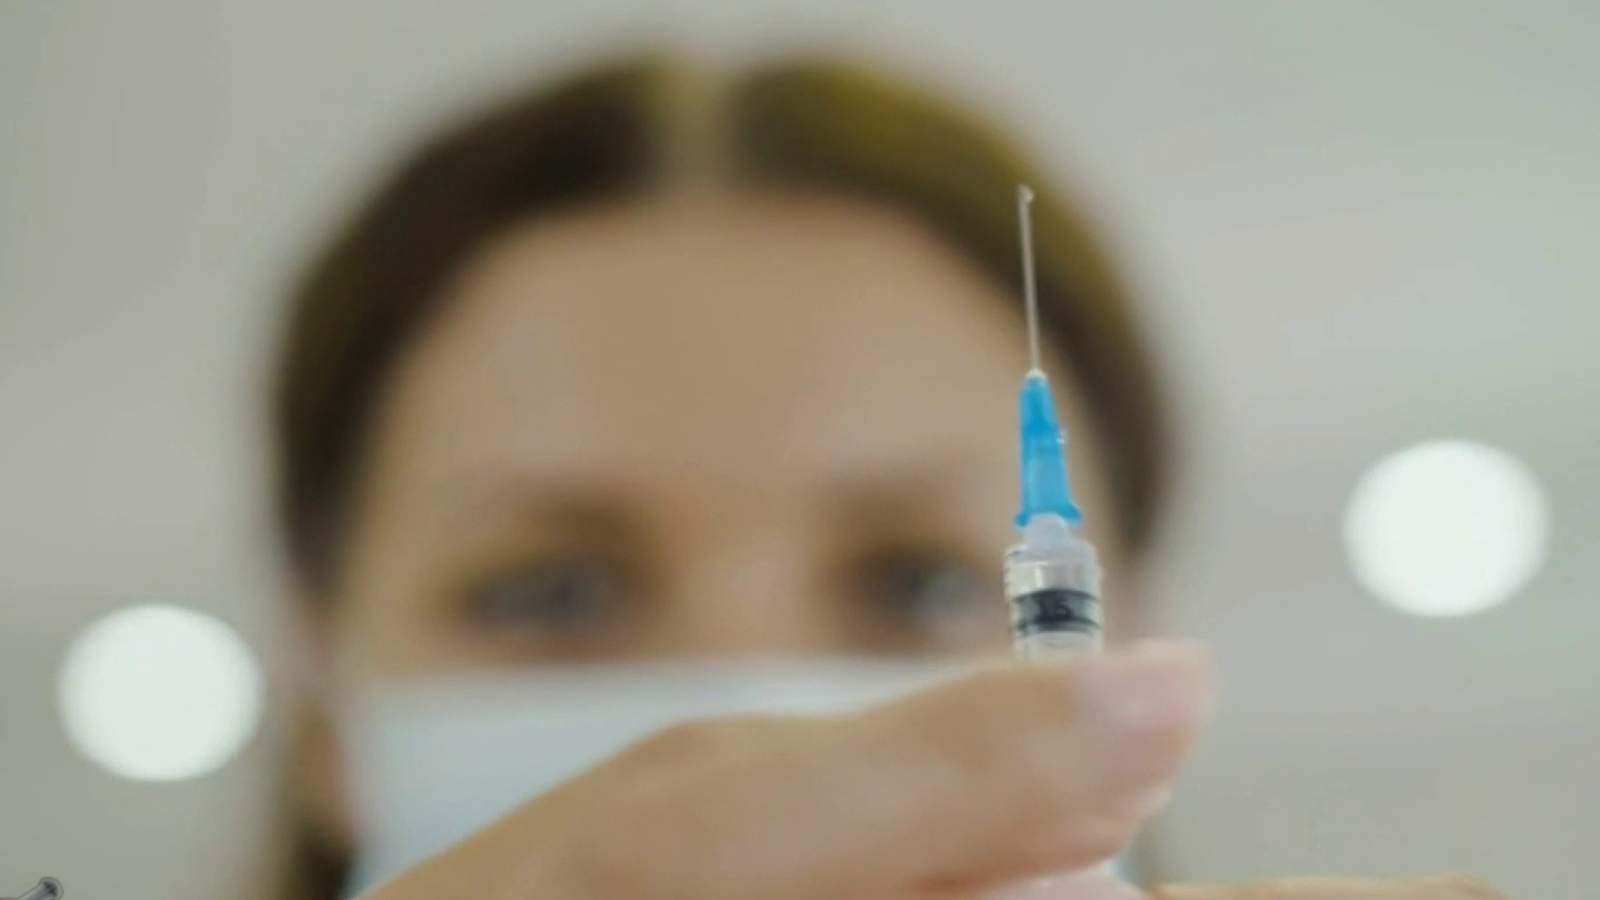 Nurse expresses concerns about Houston Methodist’s mandatory vaccine policy for employees